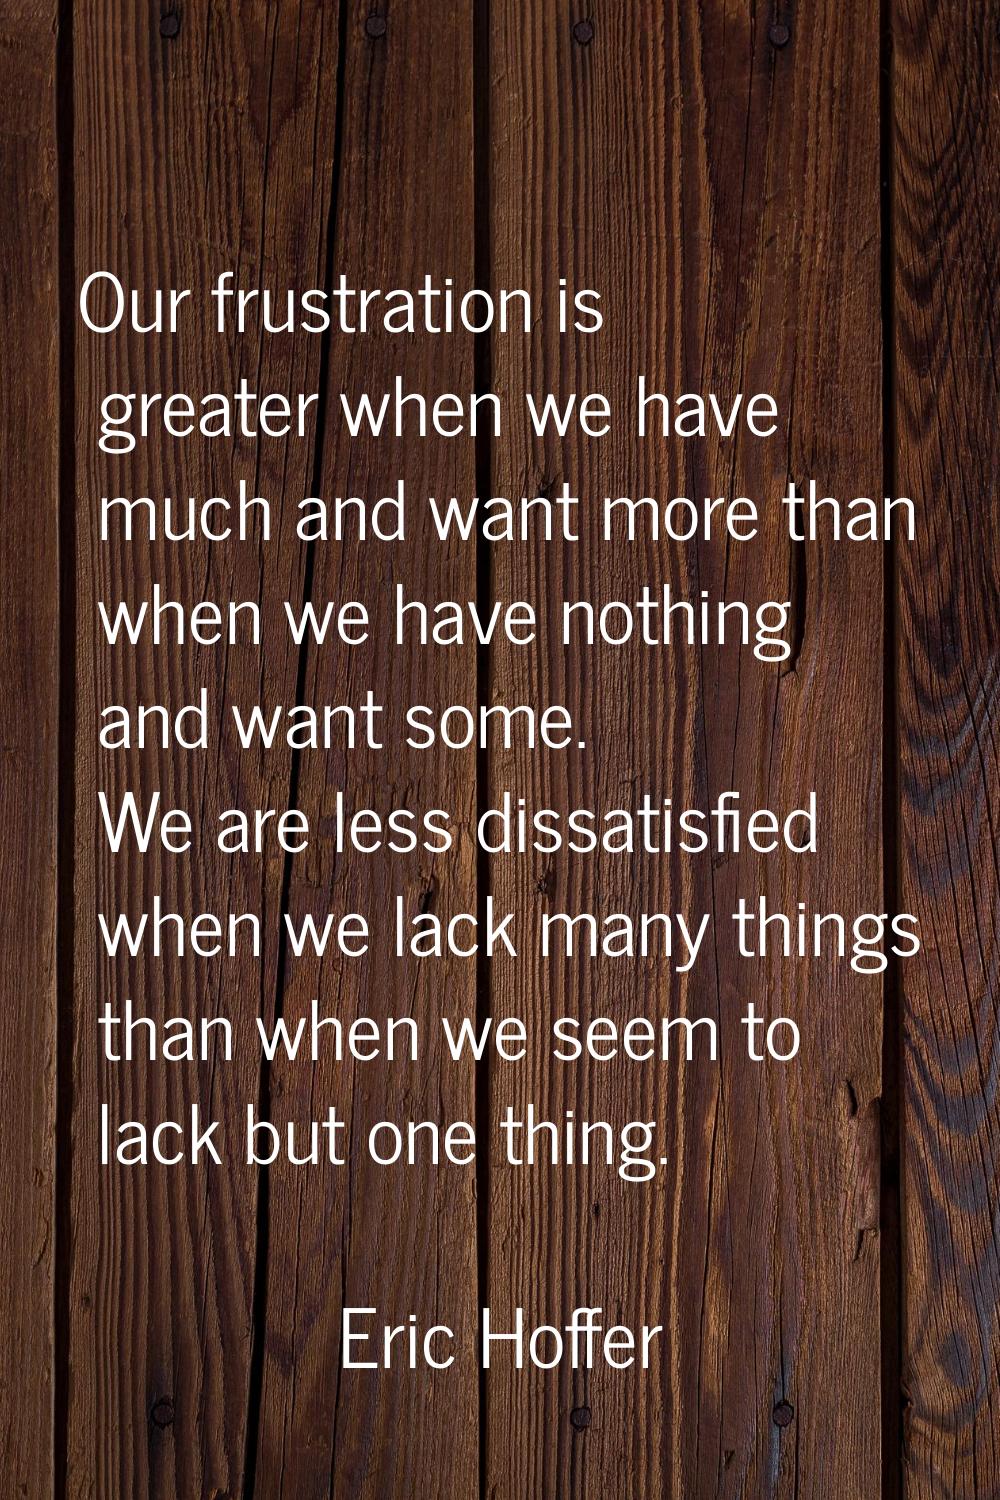 Our frustration is greater when we have much and want more than when we have nothing and want some.